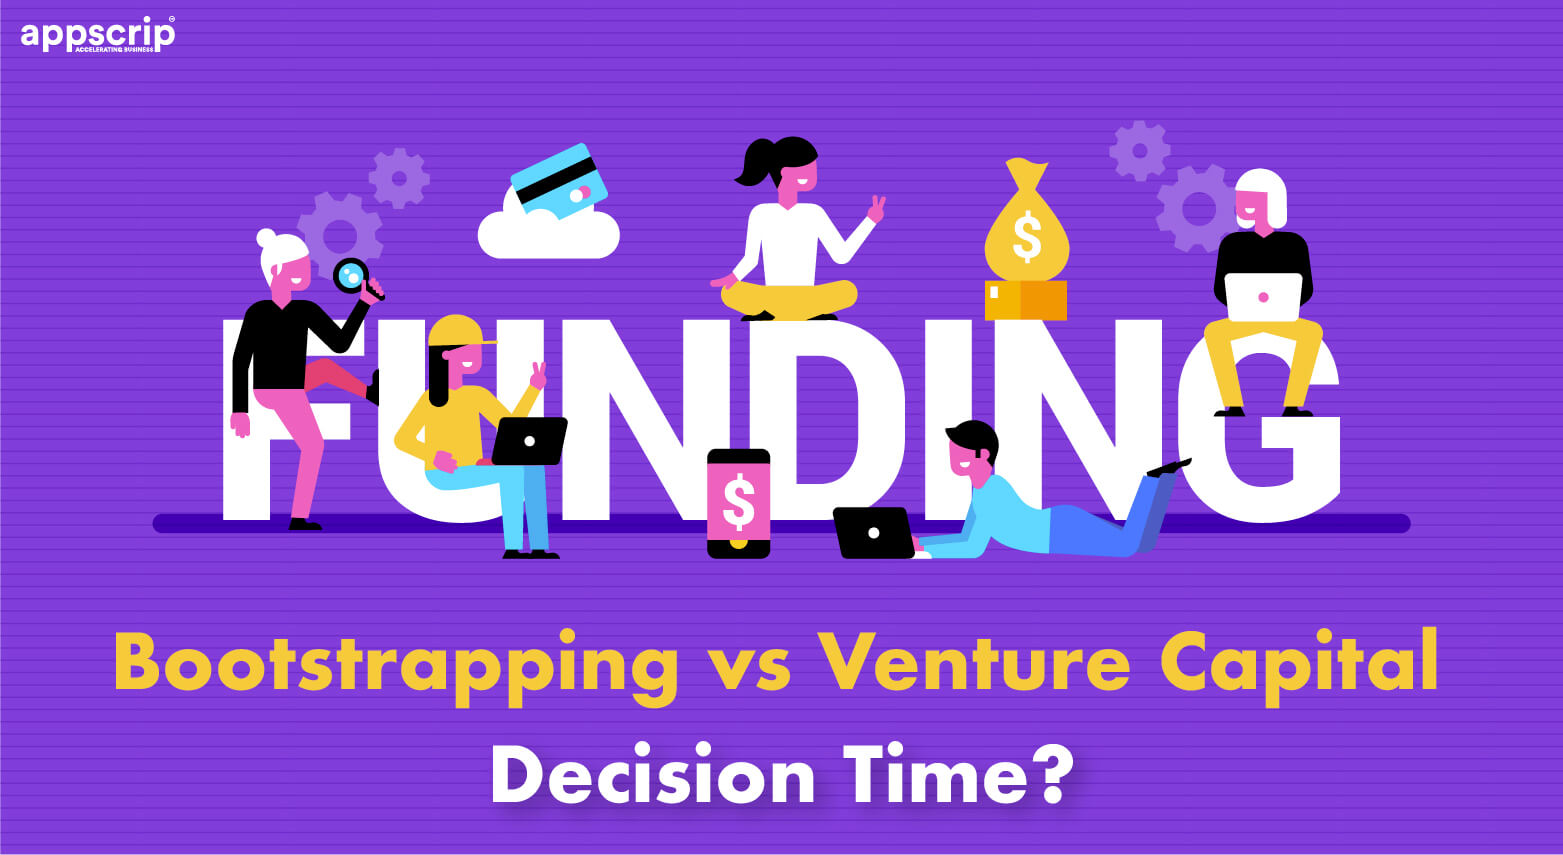 Bootstrapping vs Venture Capital